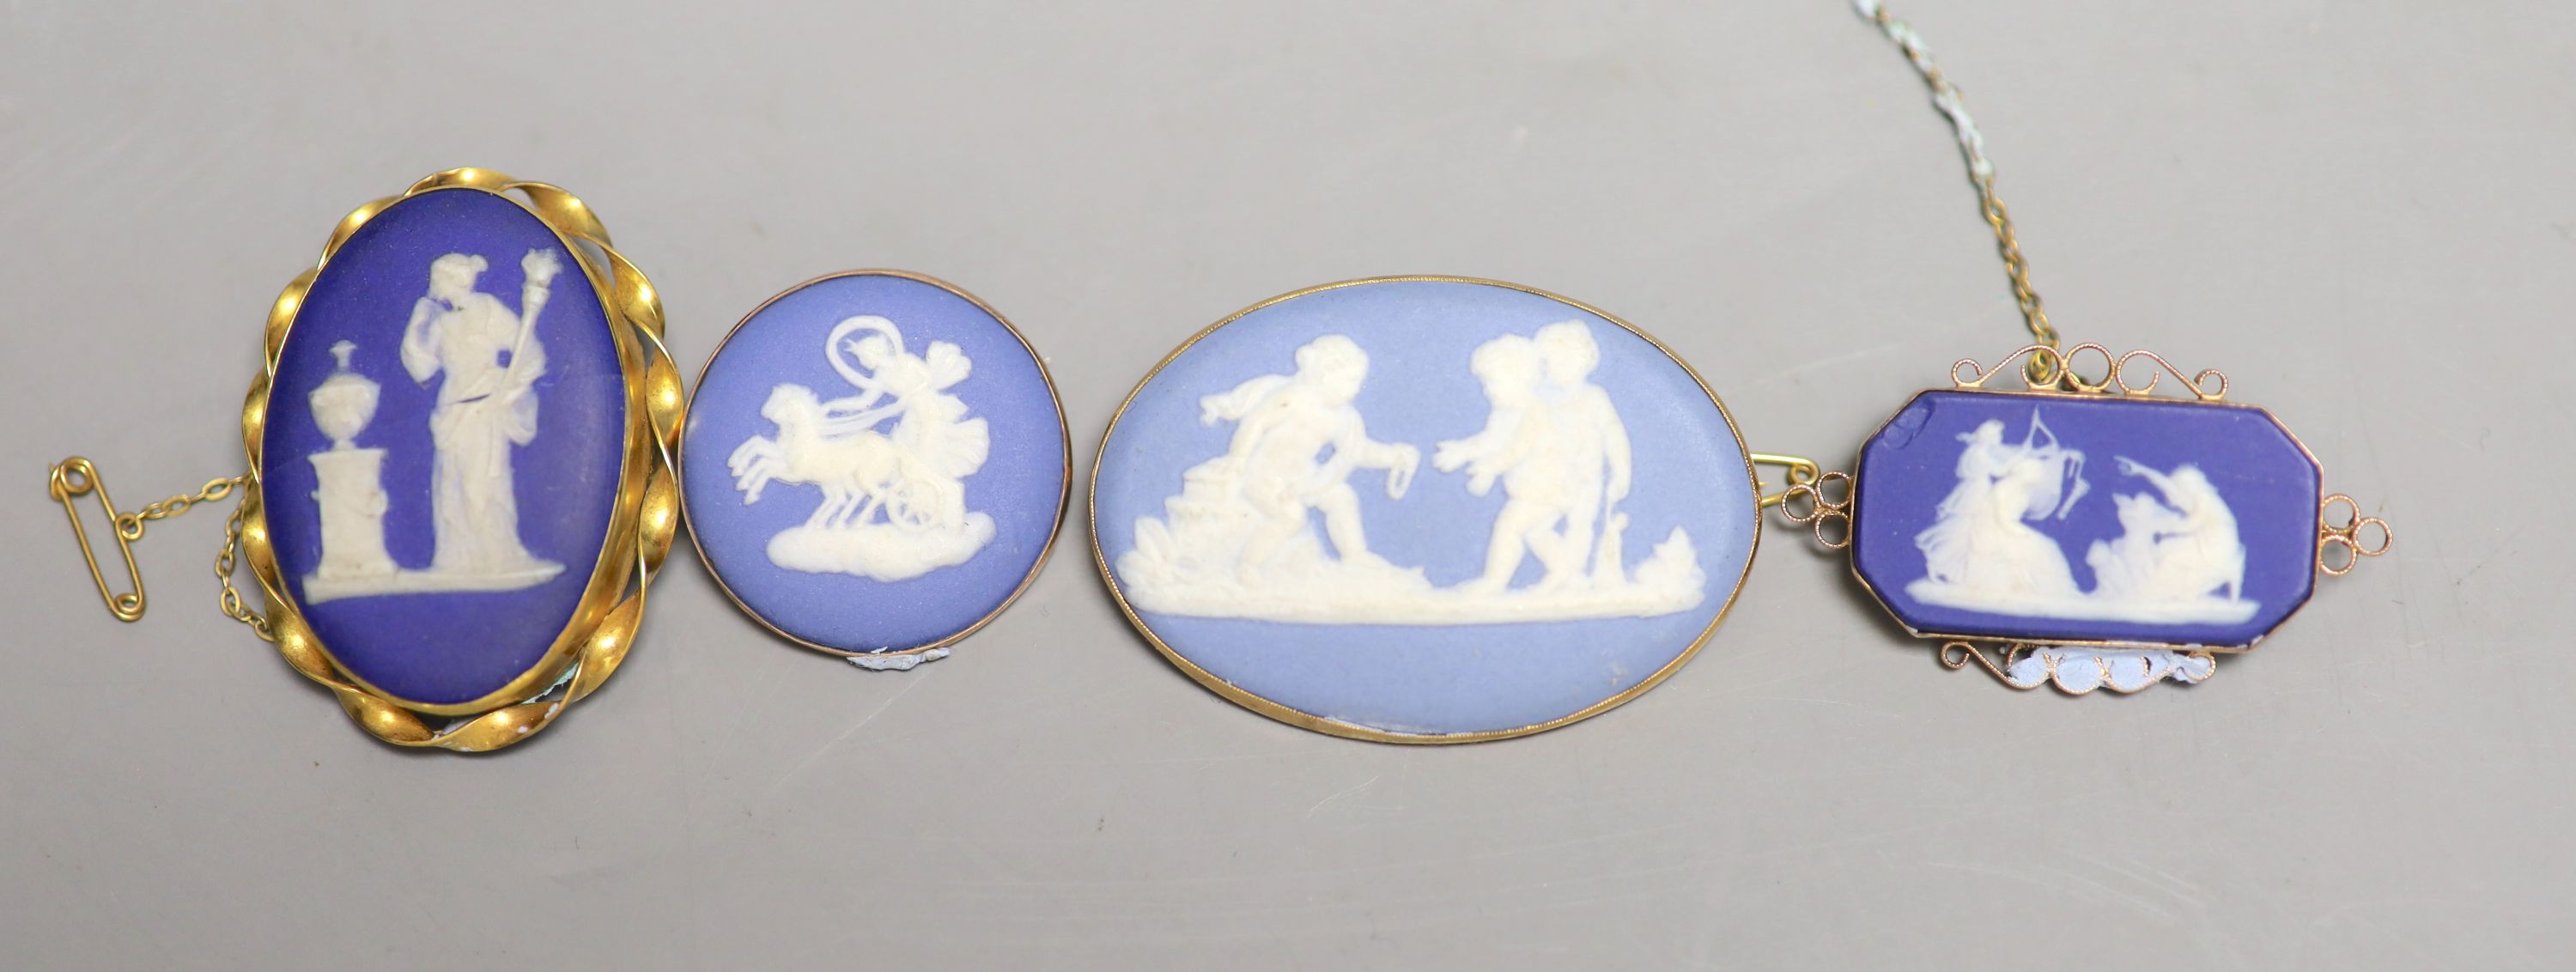 Four assorted late 19th/early 20th century yellow metal mounted Wedgwood plaque brooches.